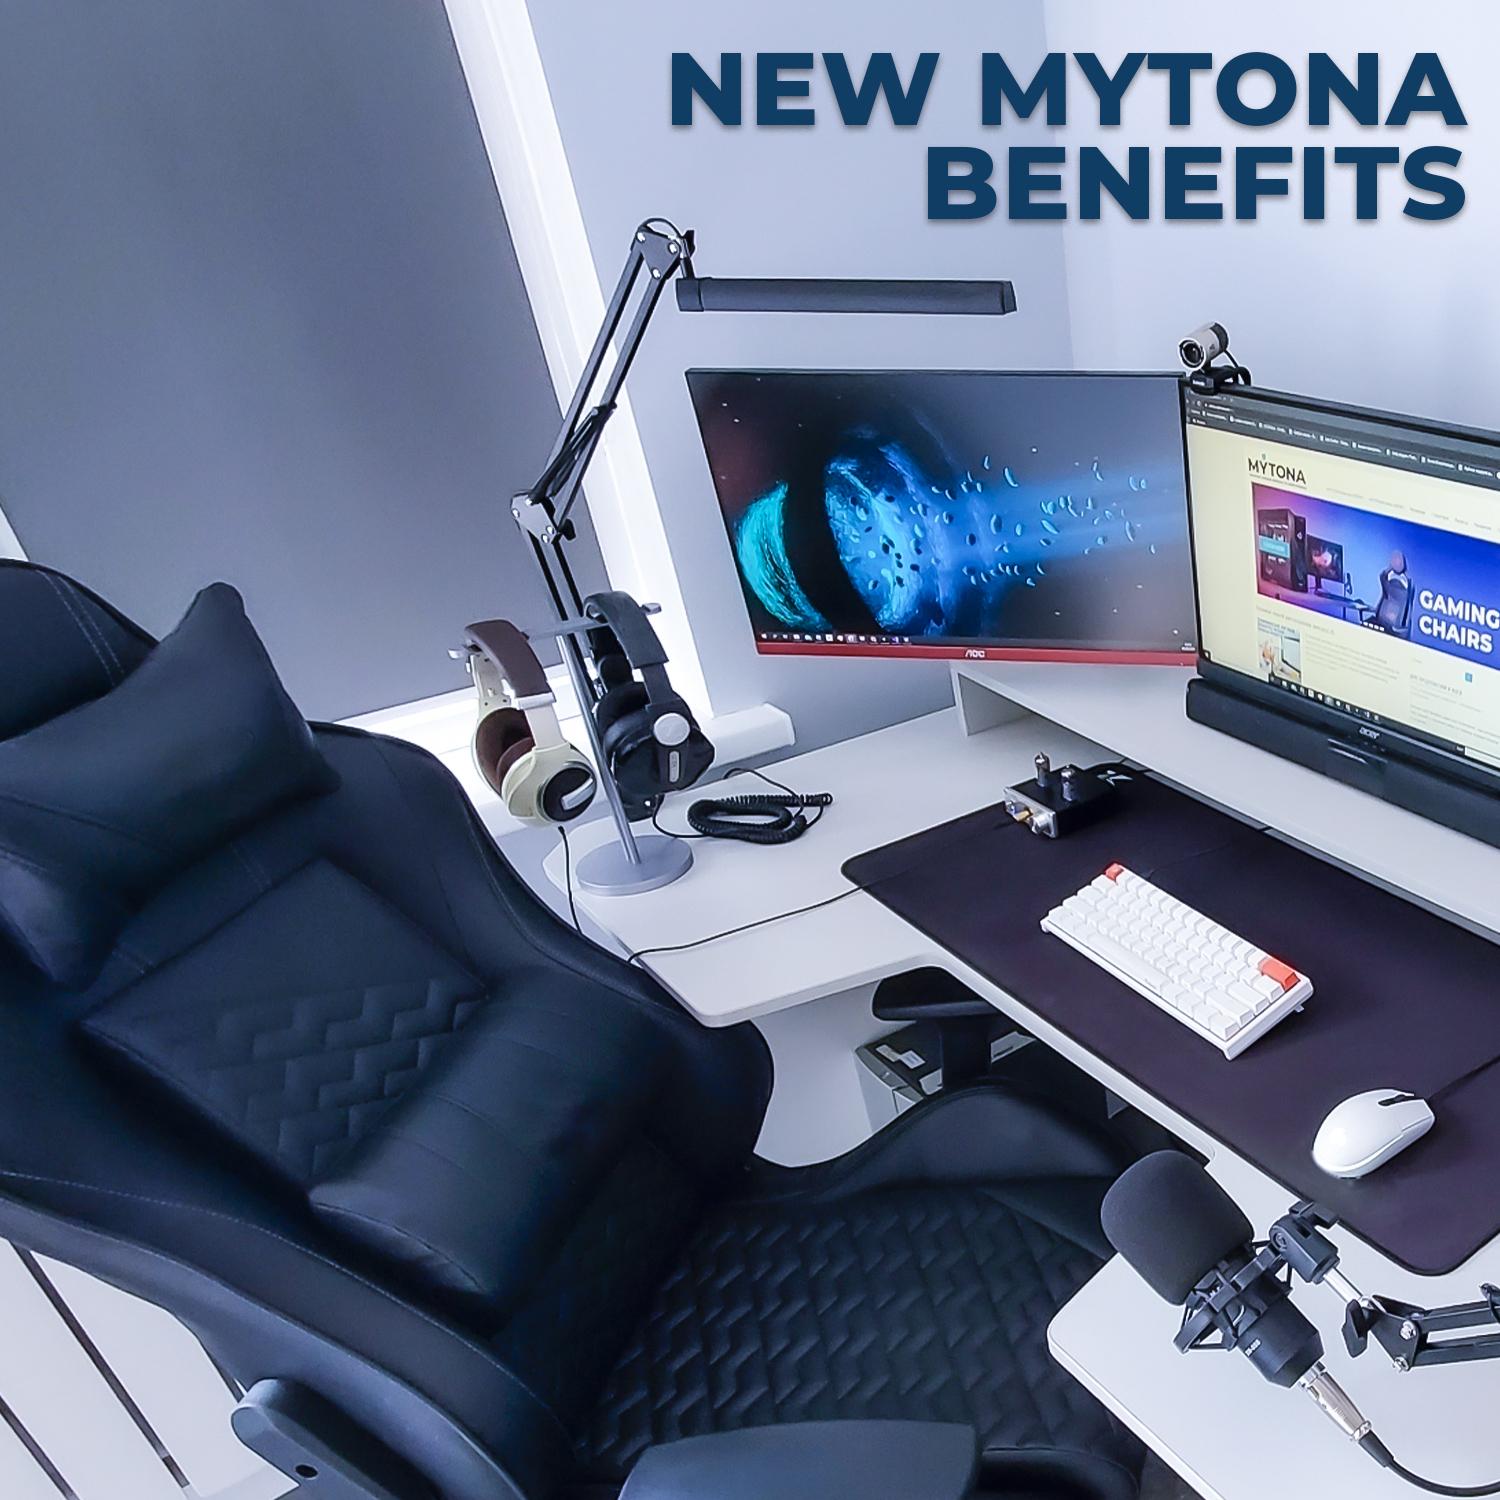 MYTONA Perks: Benefit Upgrades for Mytonians in Our Overseas Offices